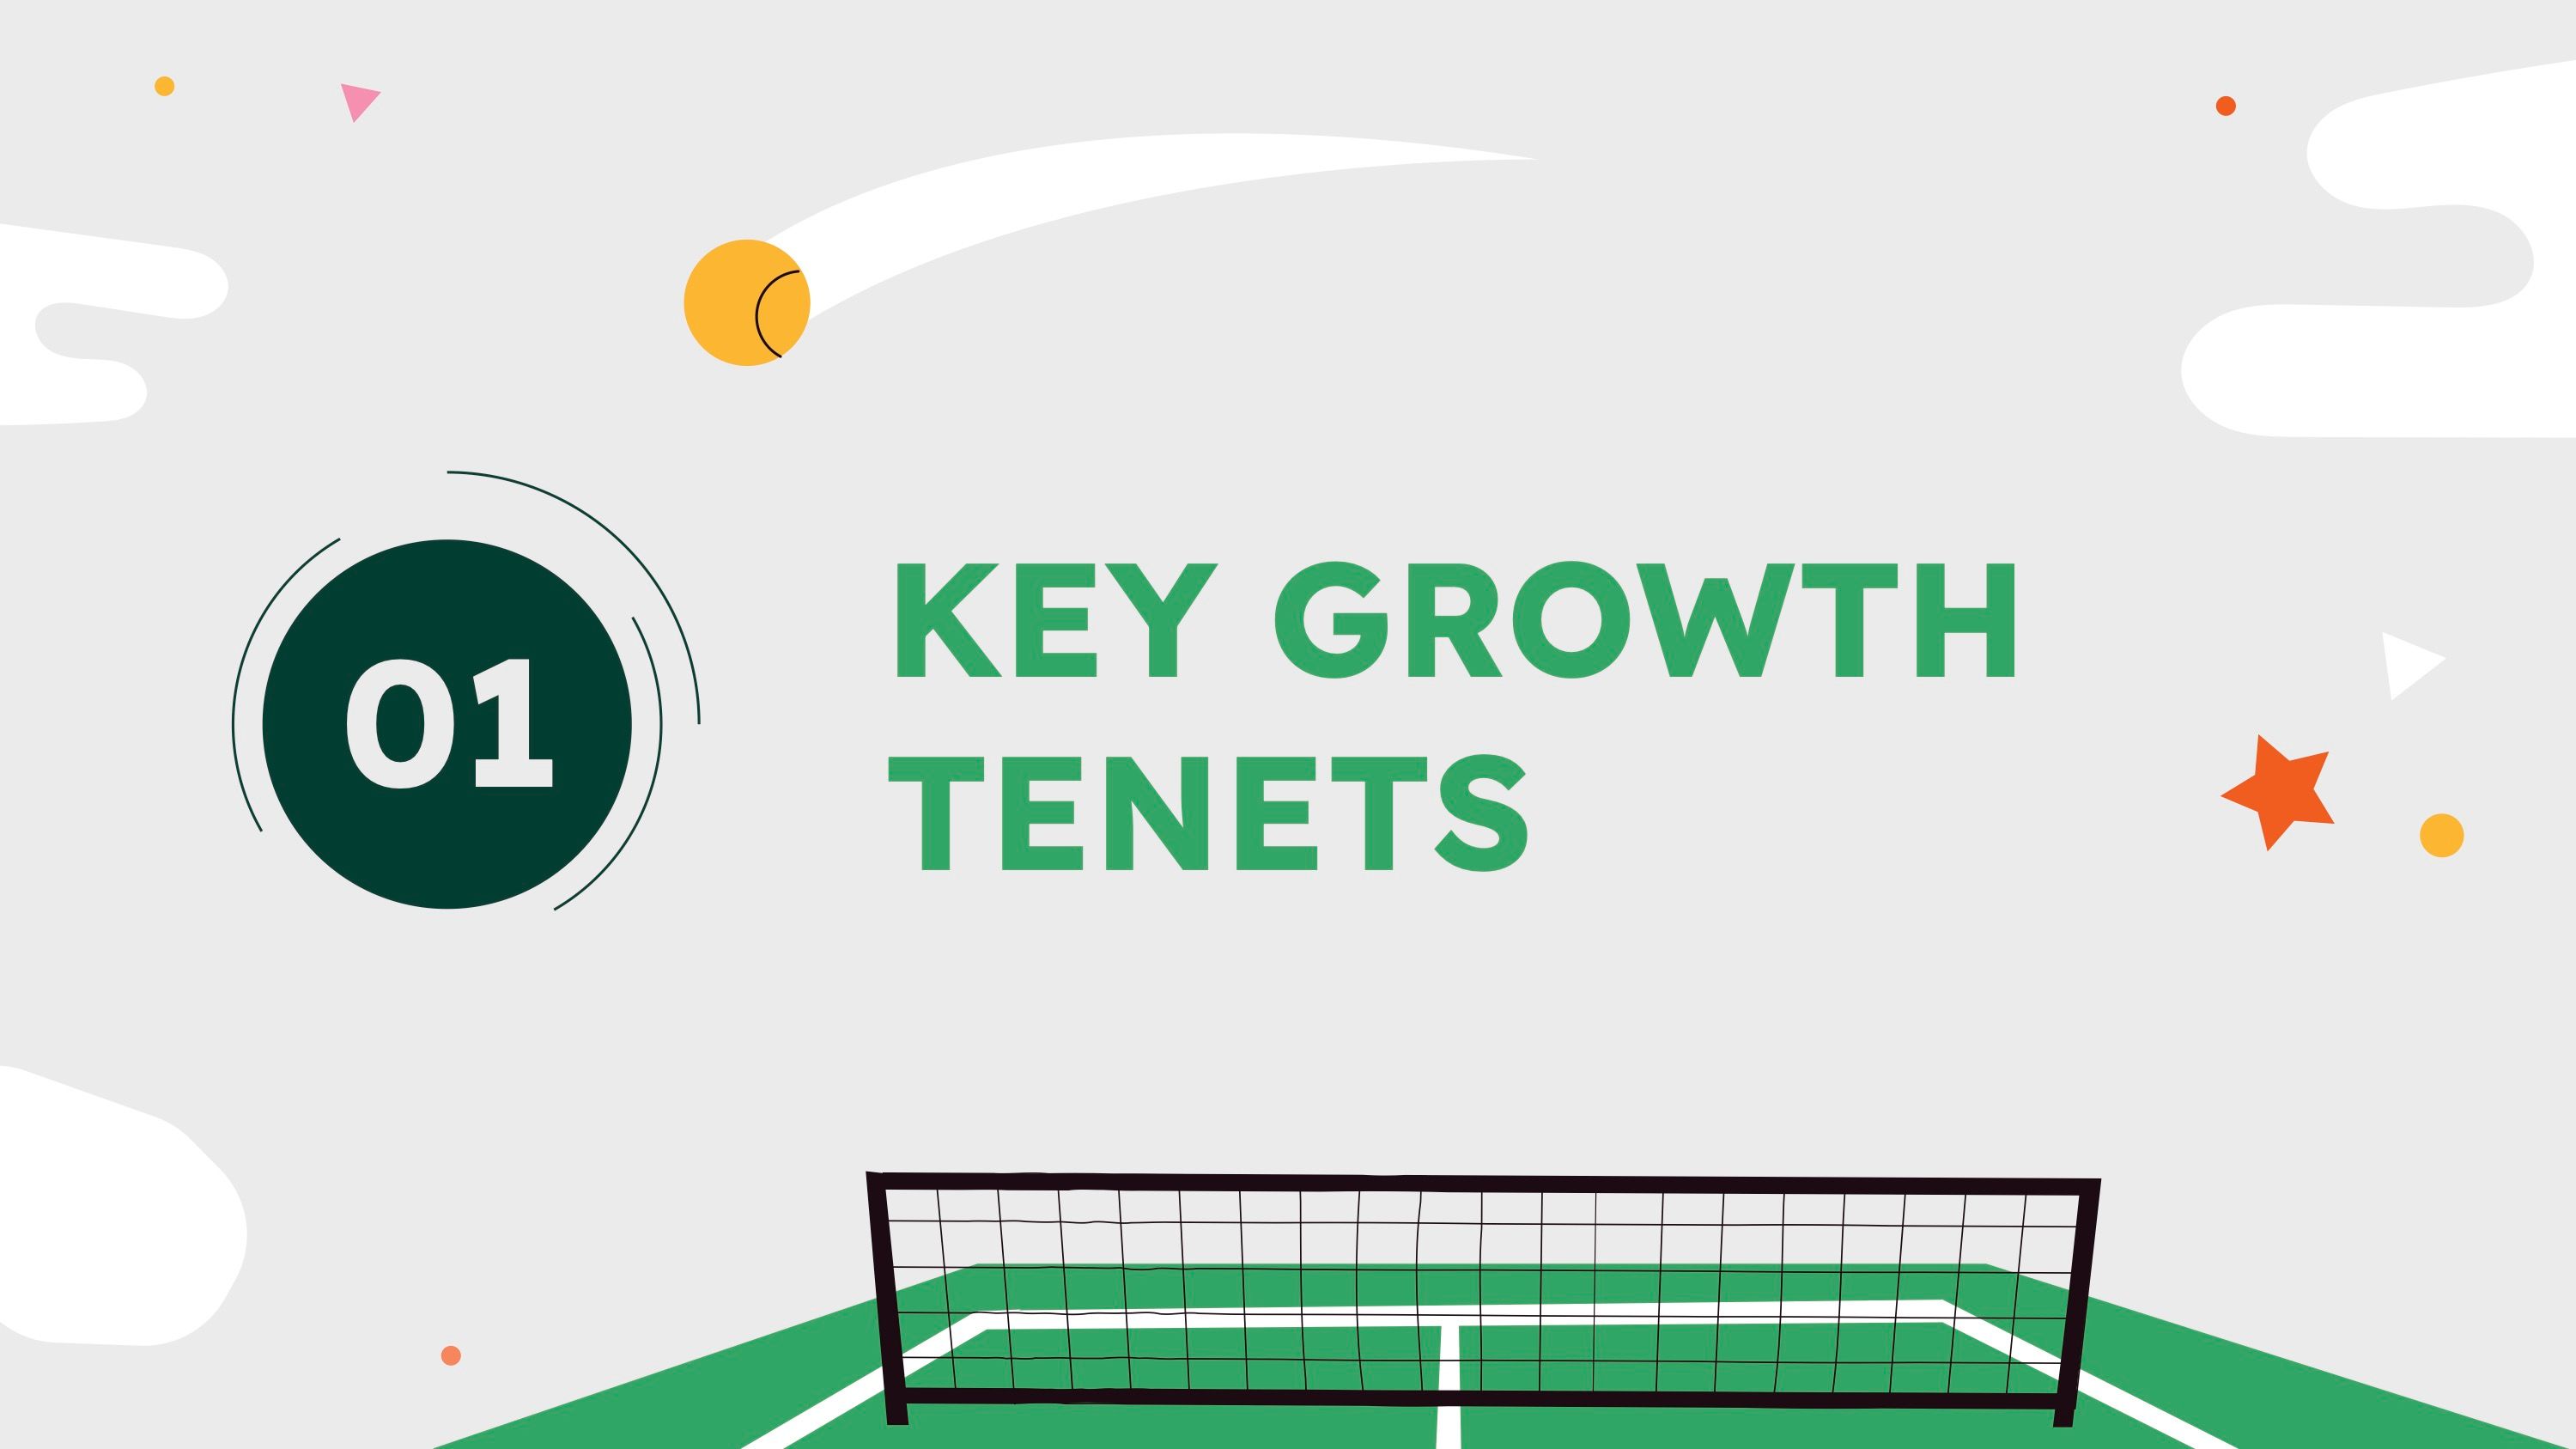 4. Title slide for 'Key growth tenets'